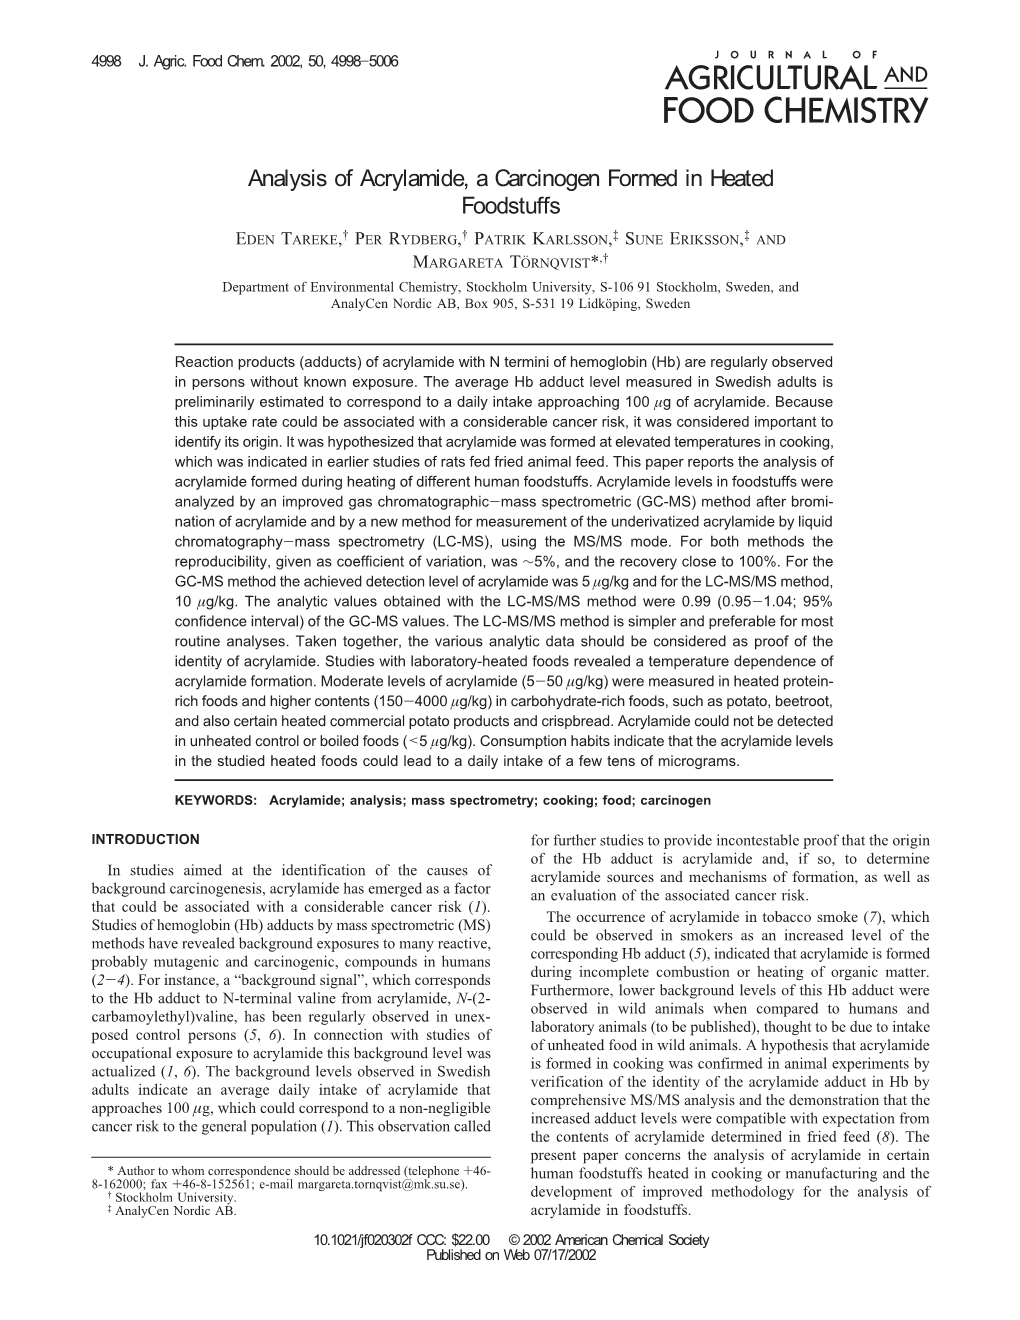 Analysis of Acrylamide, a Carcinogen Formed in Heated Foodstuffs